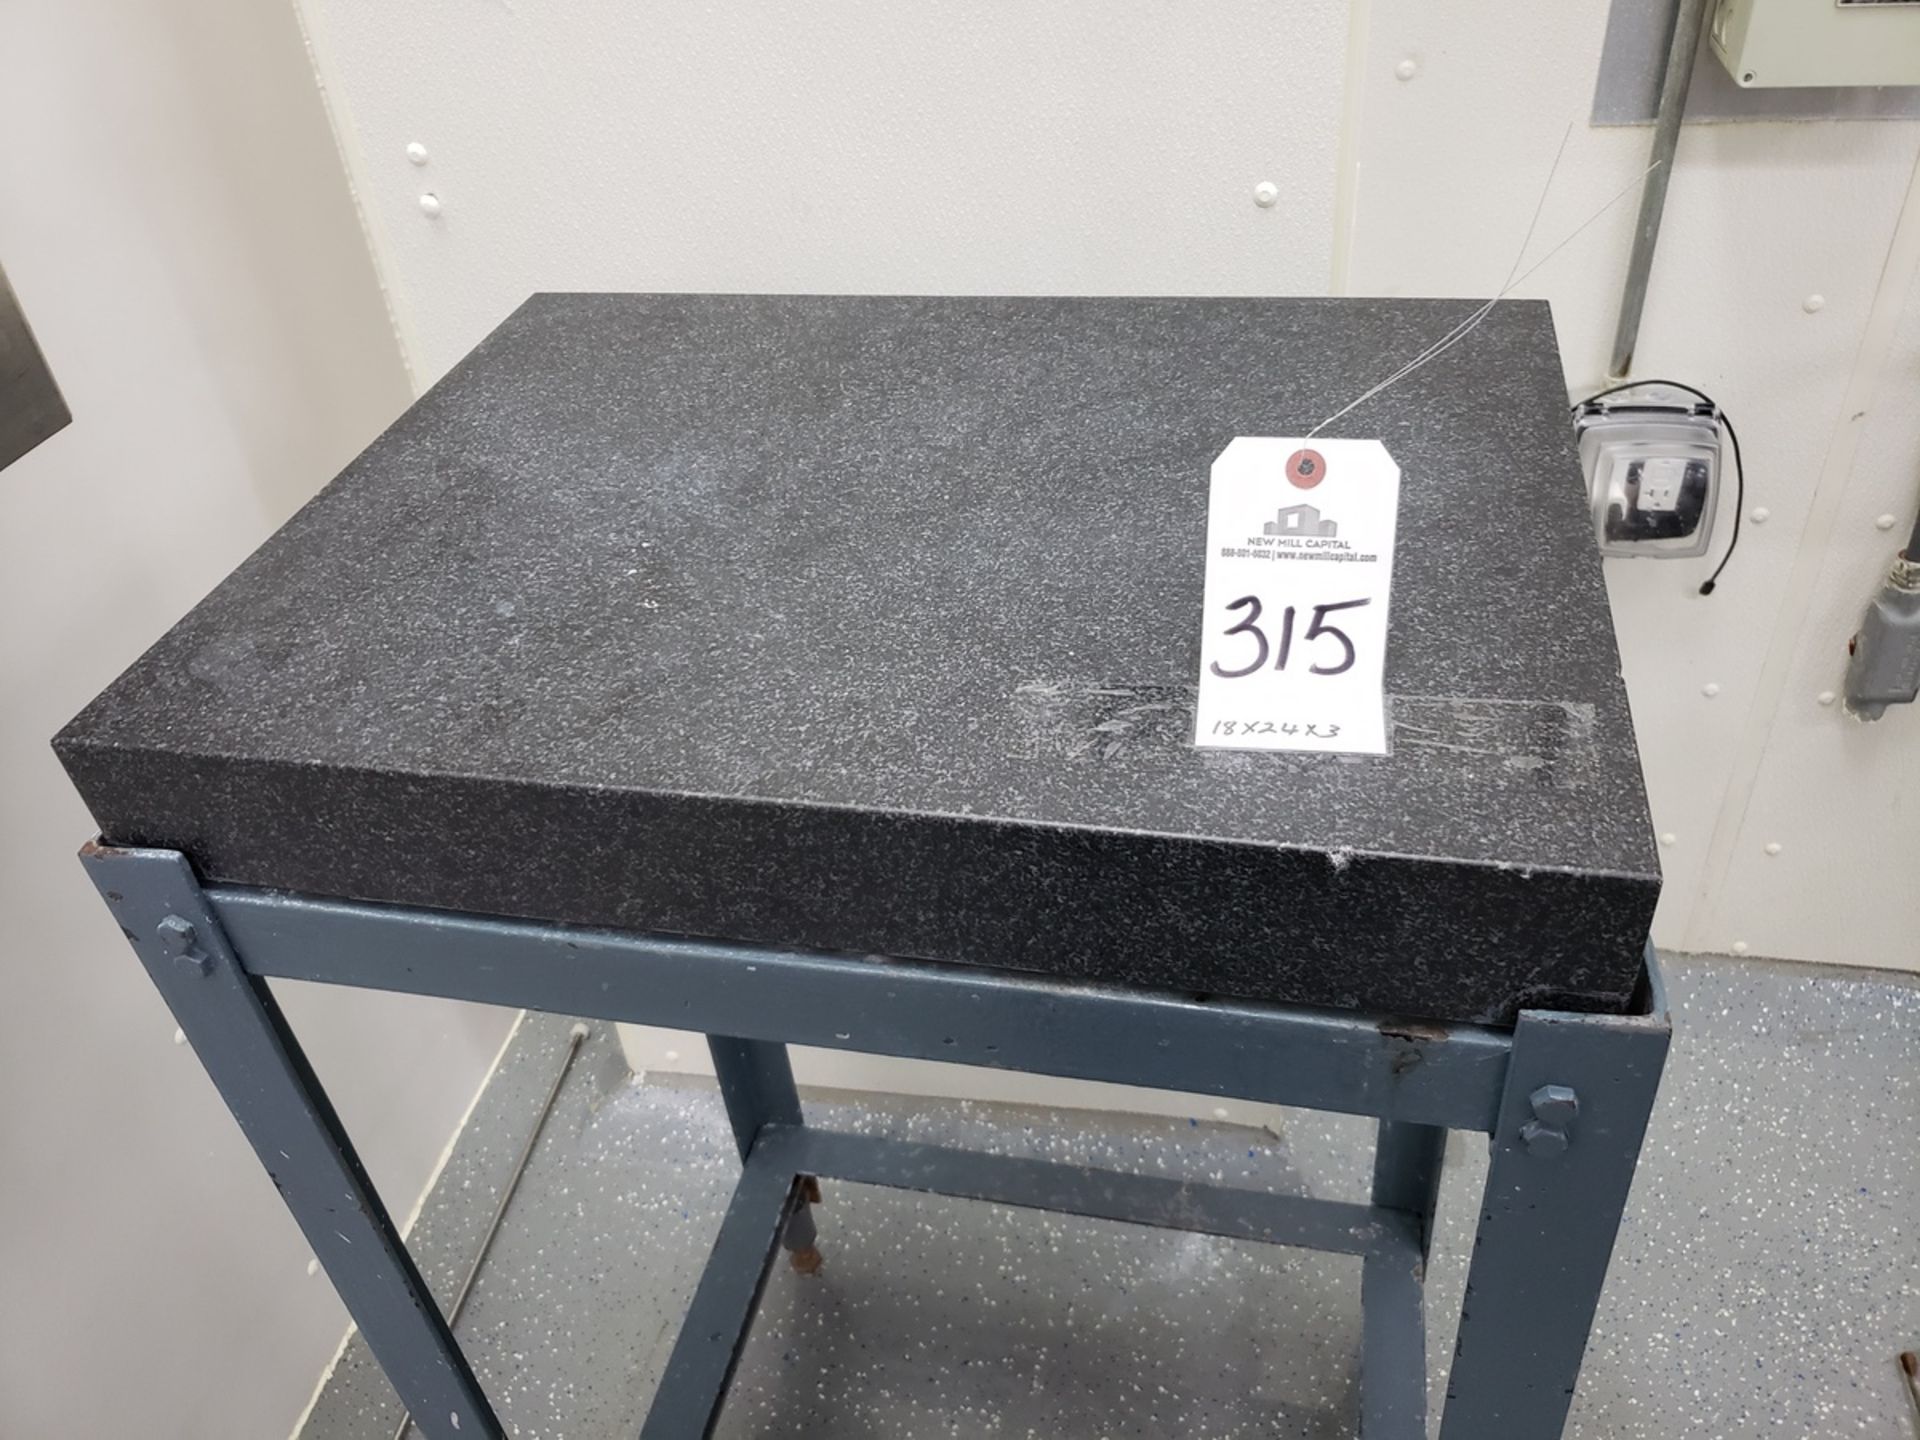 18" X 24" X 3" Granite Surface Plate, W/ Stand | Rig Fee $50